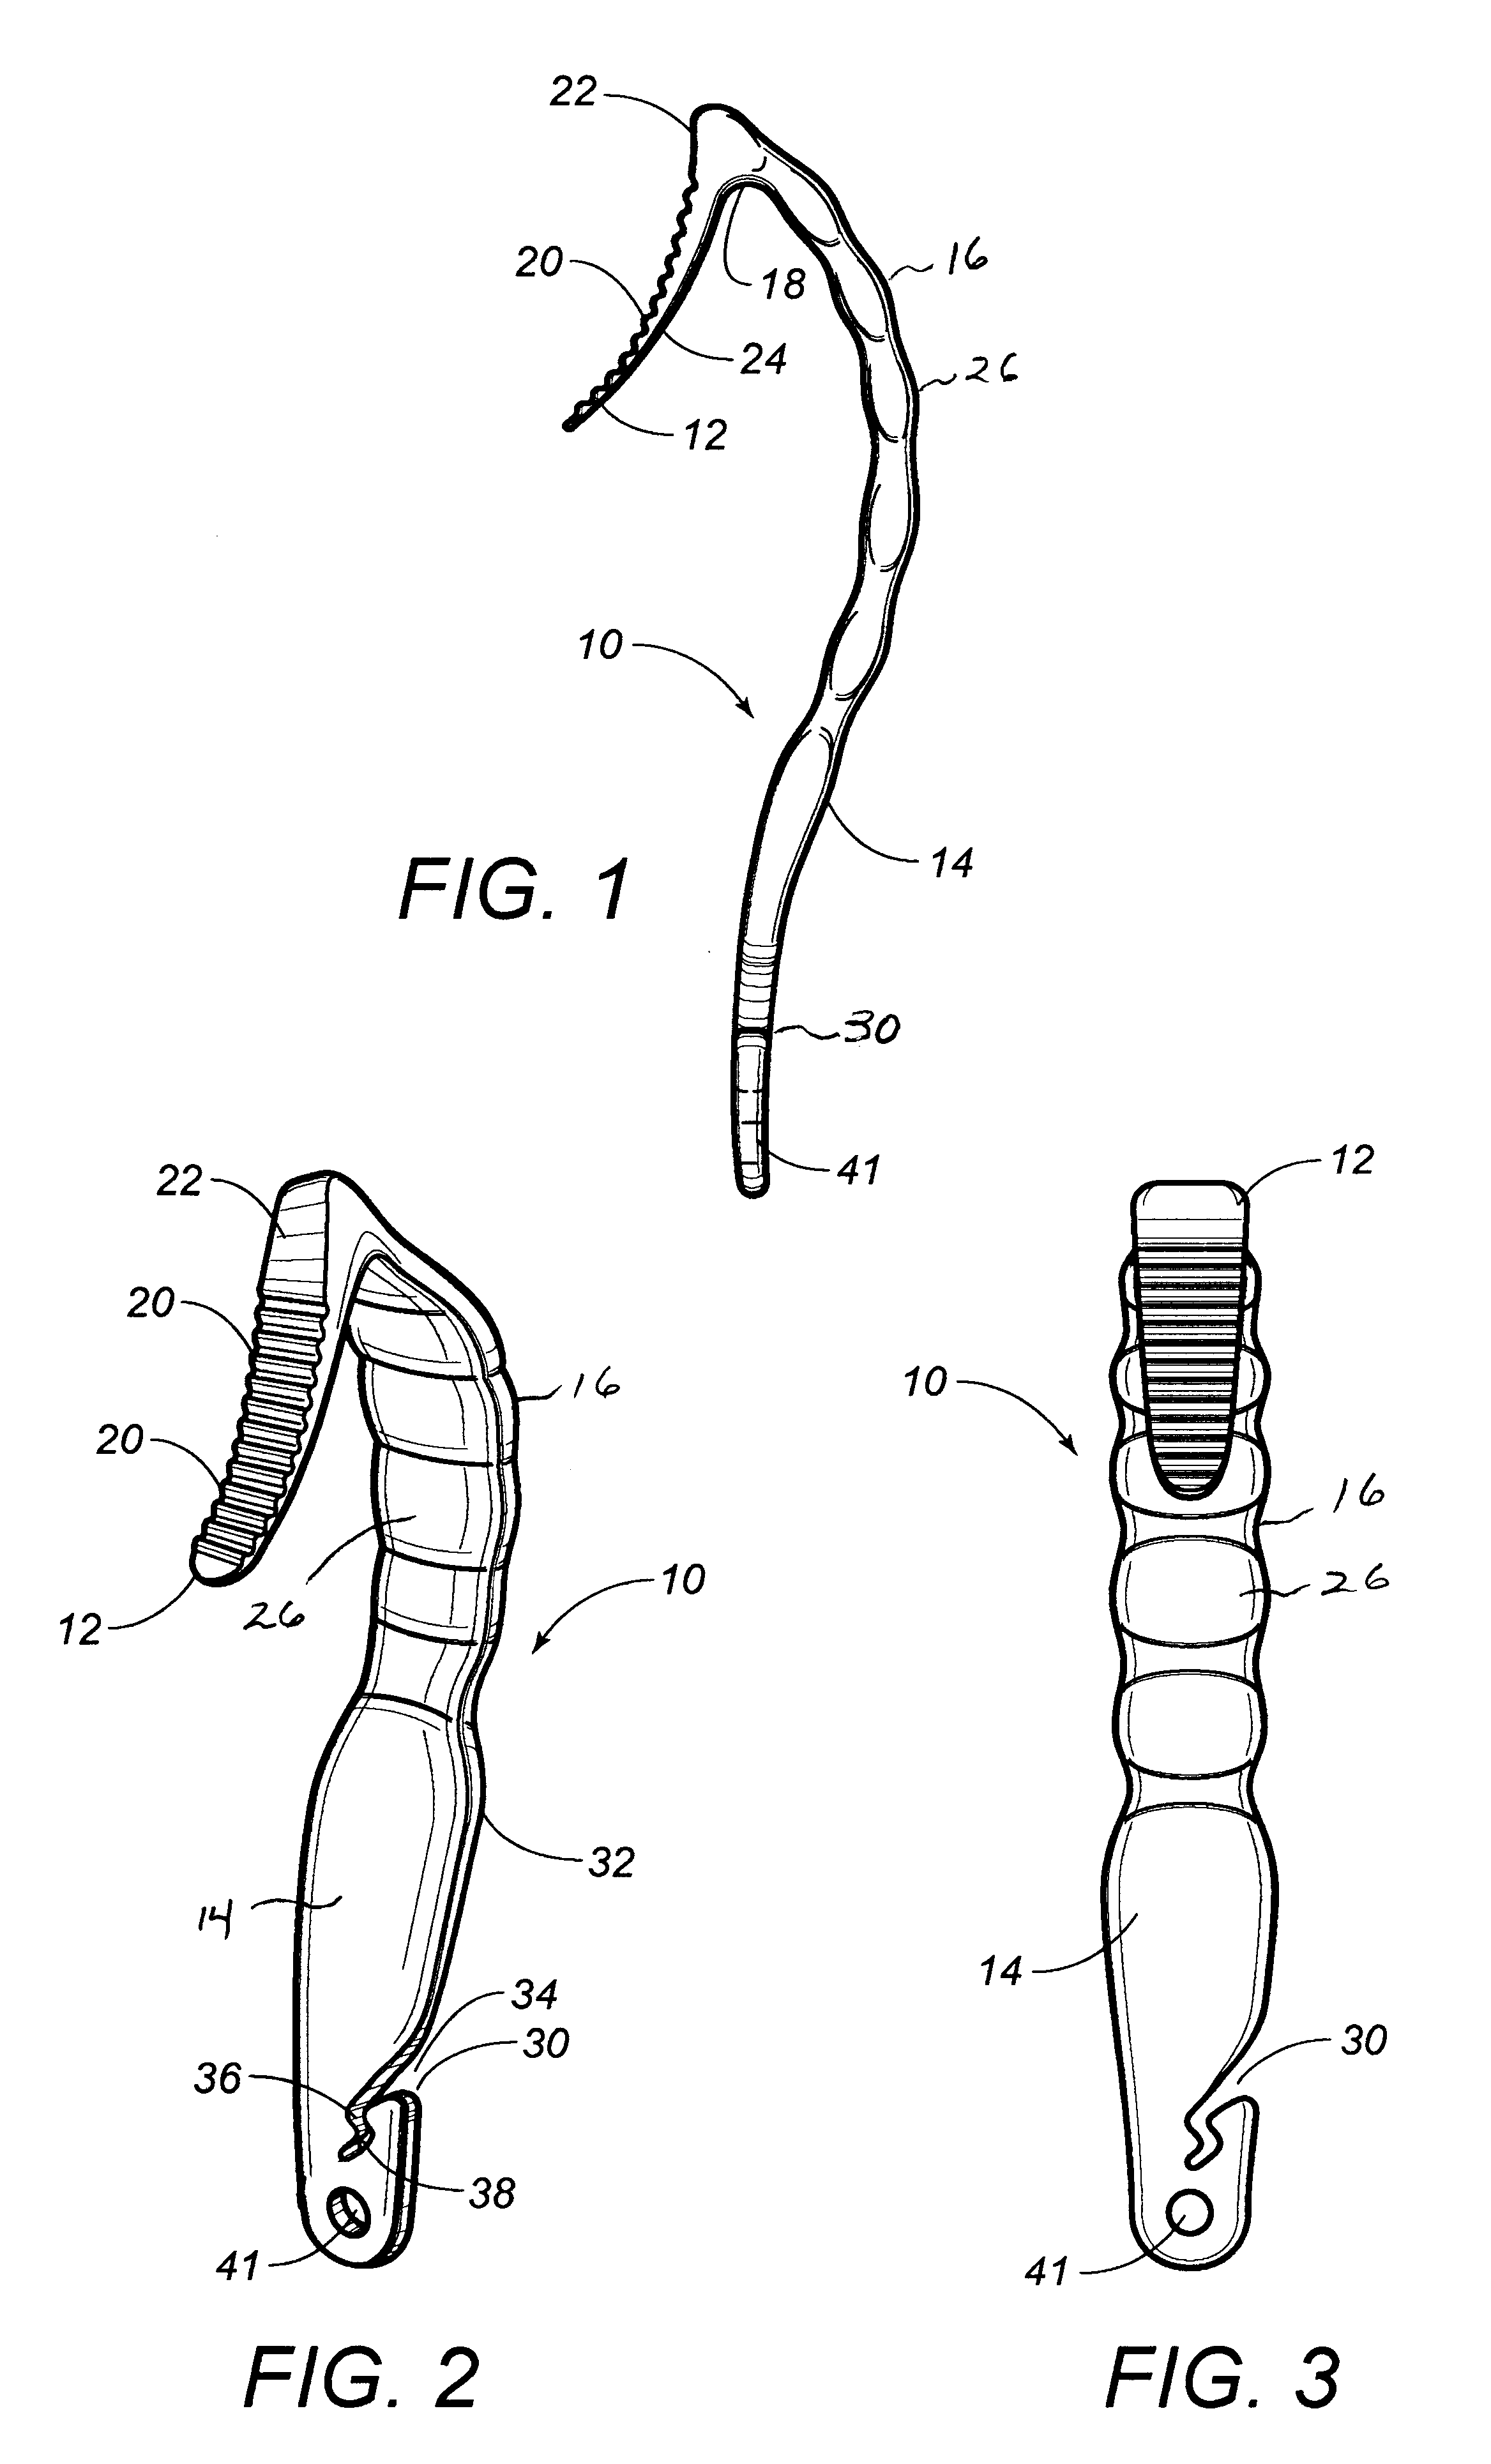 Ligament retractor assembly for use in performing knee surgery